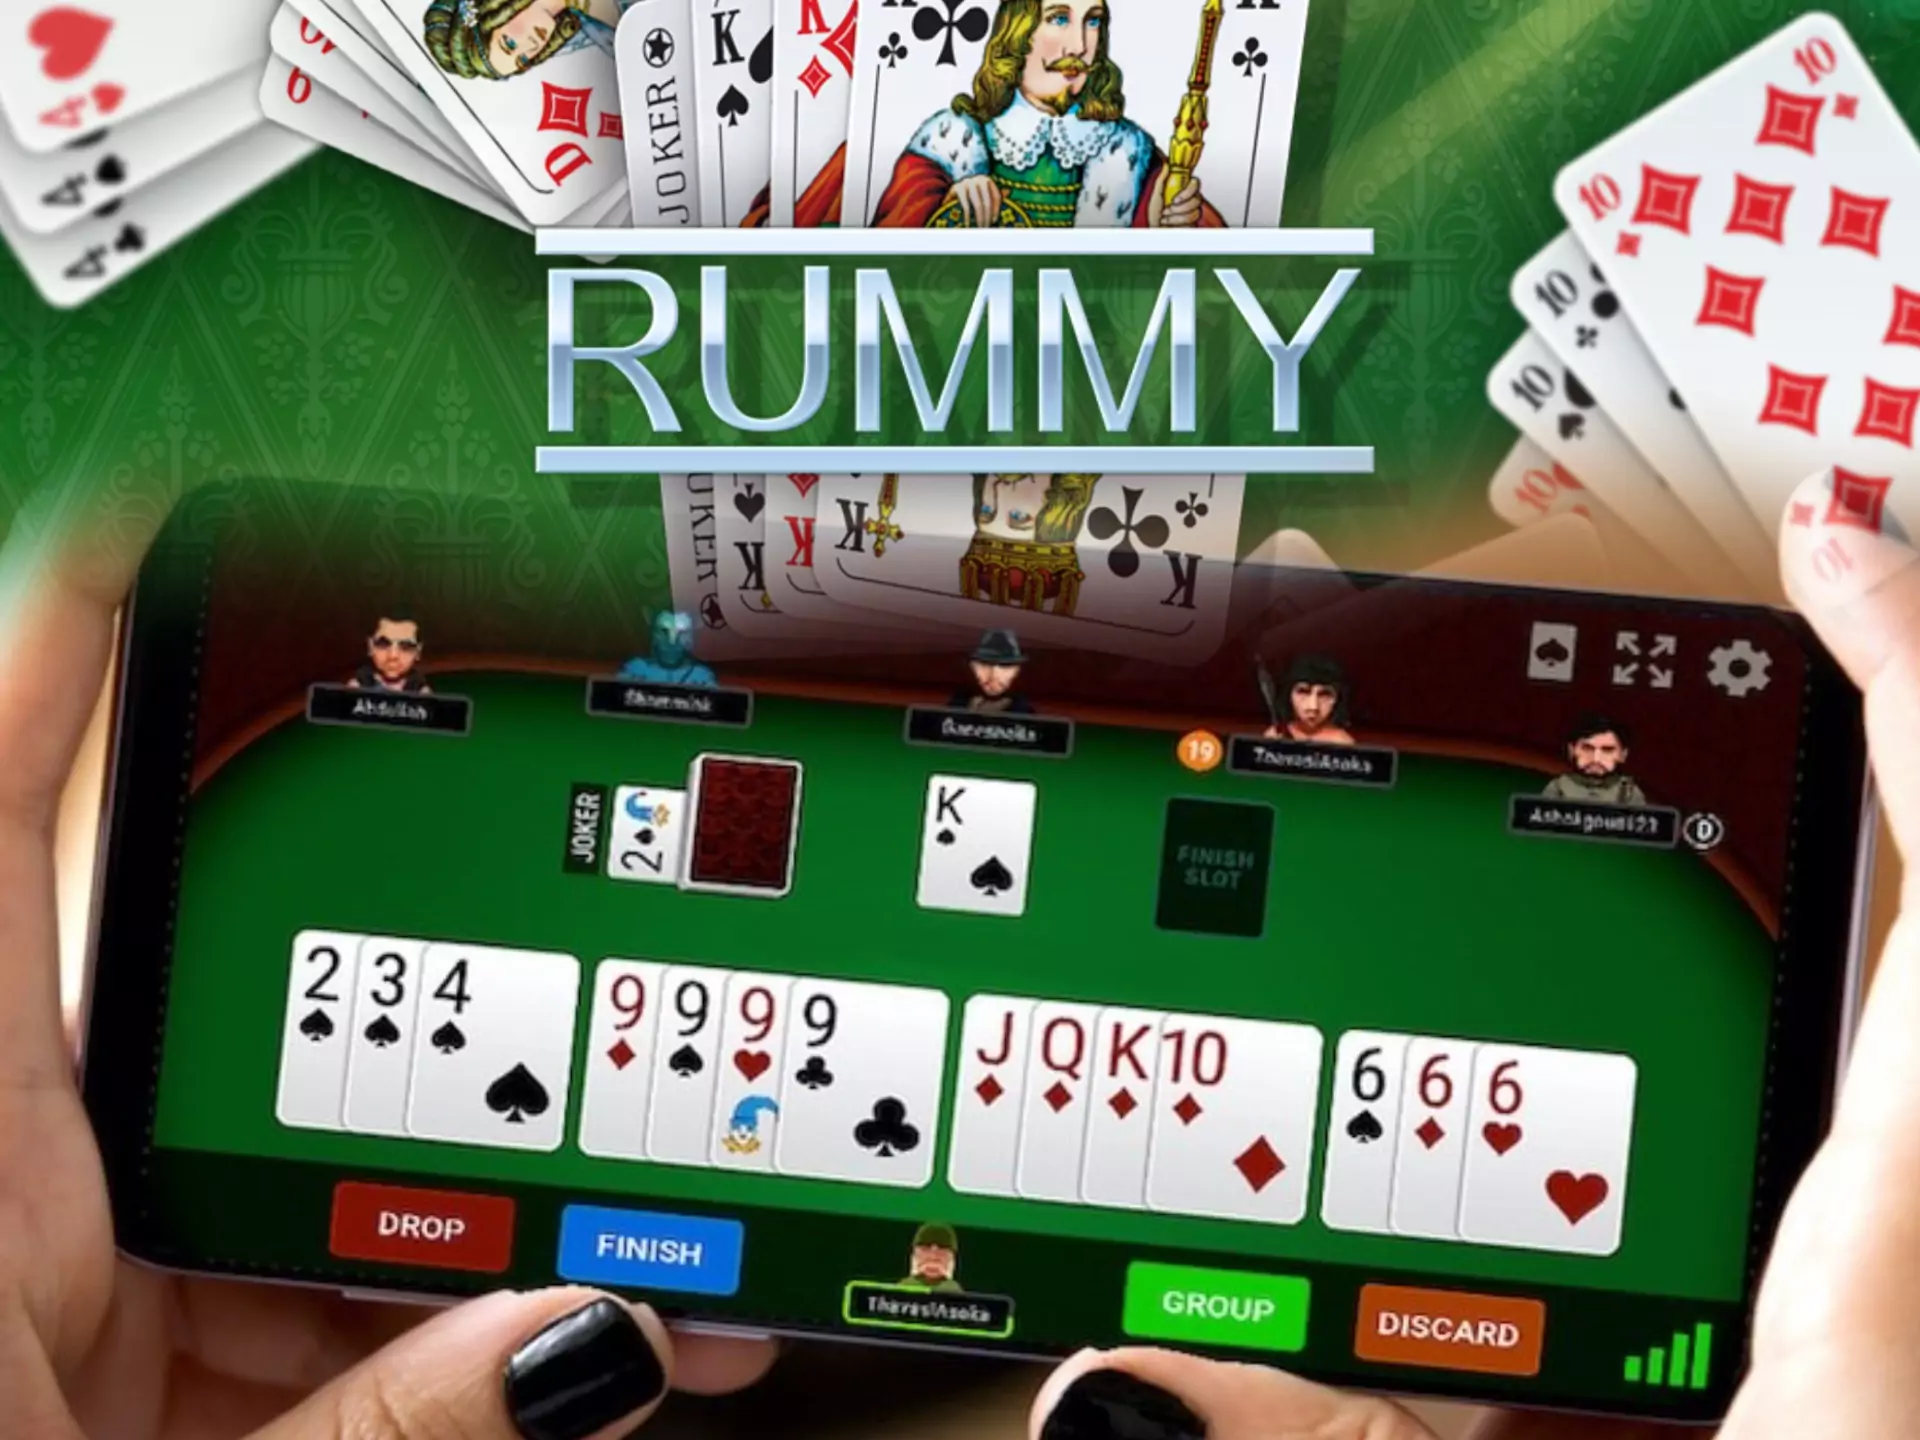 Remember our tips to make you rummy playing more profitable and successful.